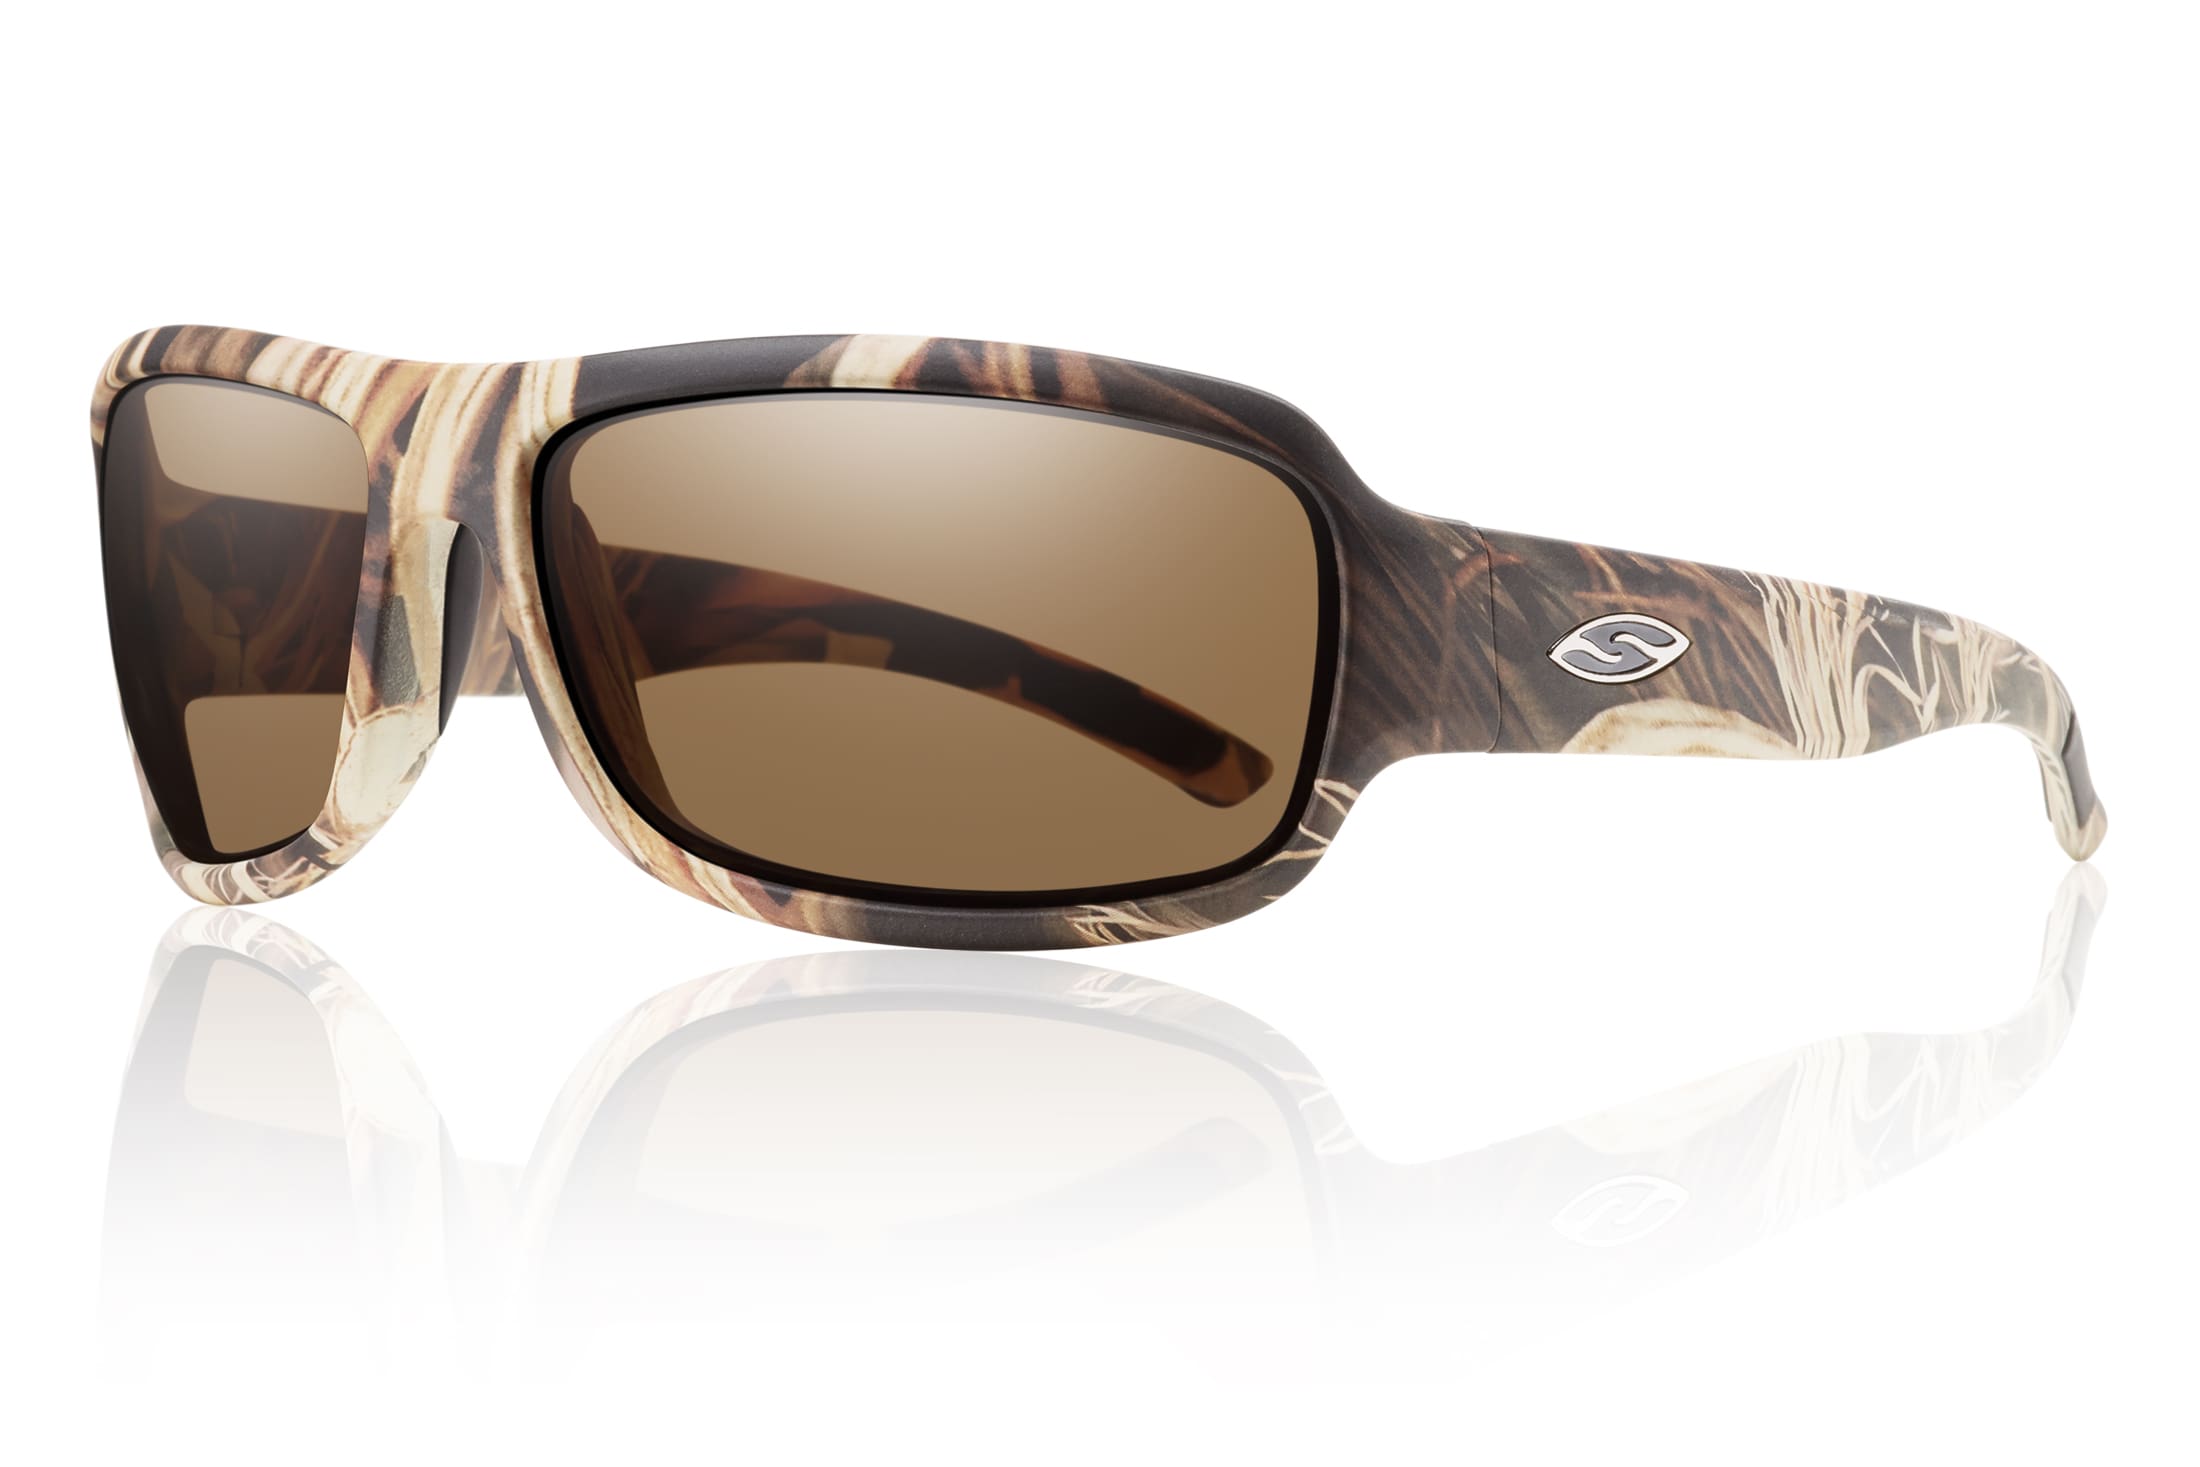 Elite Outdoor Hunting Shooting Sunglasses Camo Patterns New With Tags 